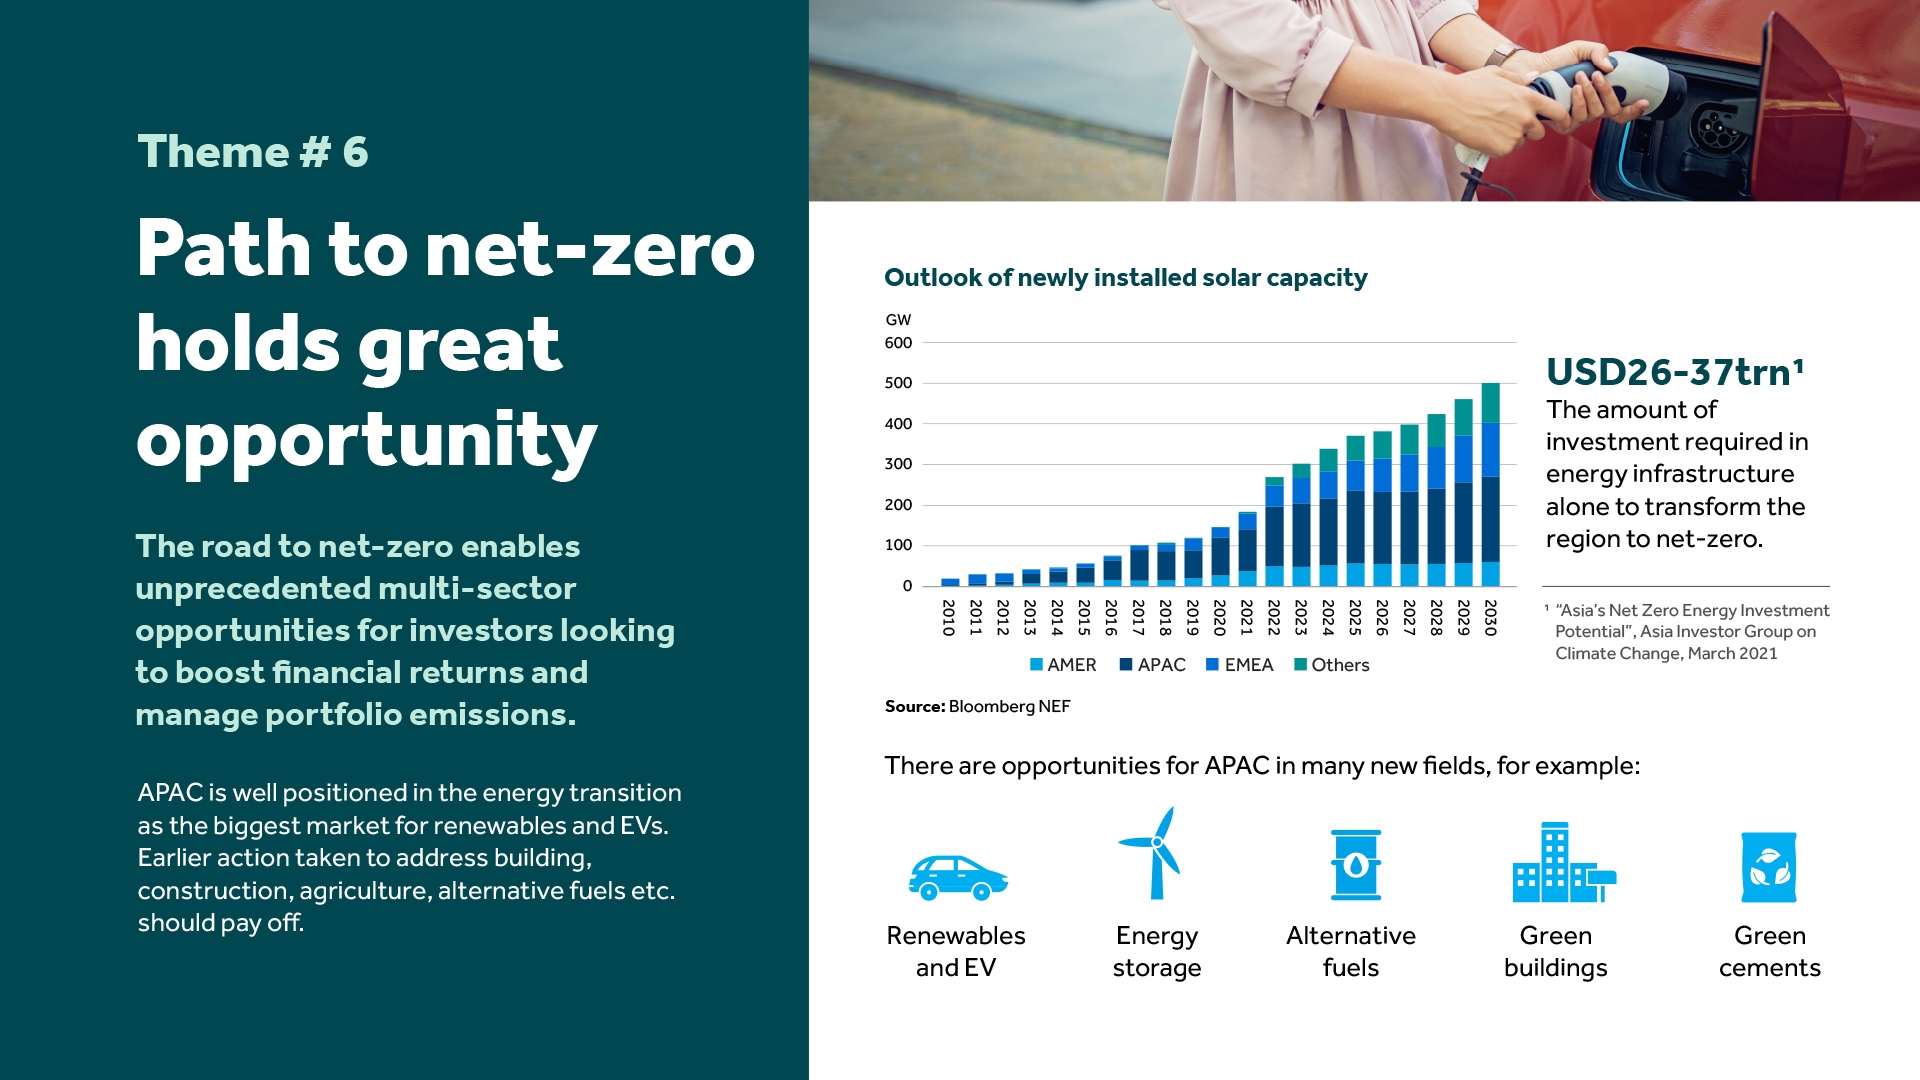 Path to net-zero holds great opportunity